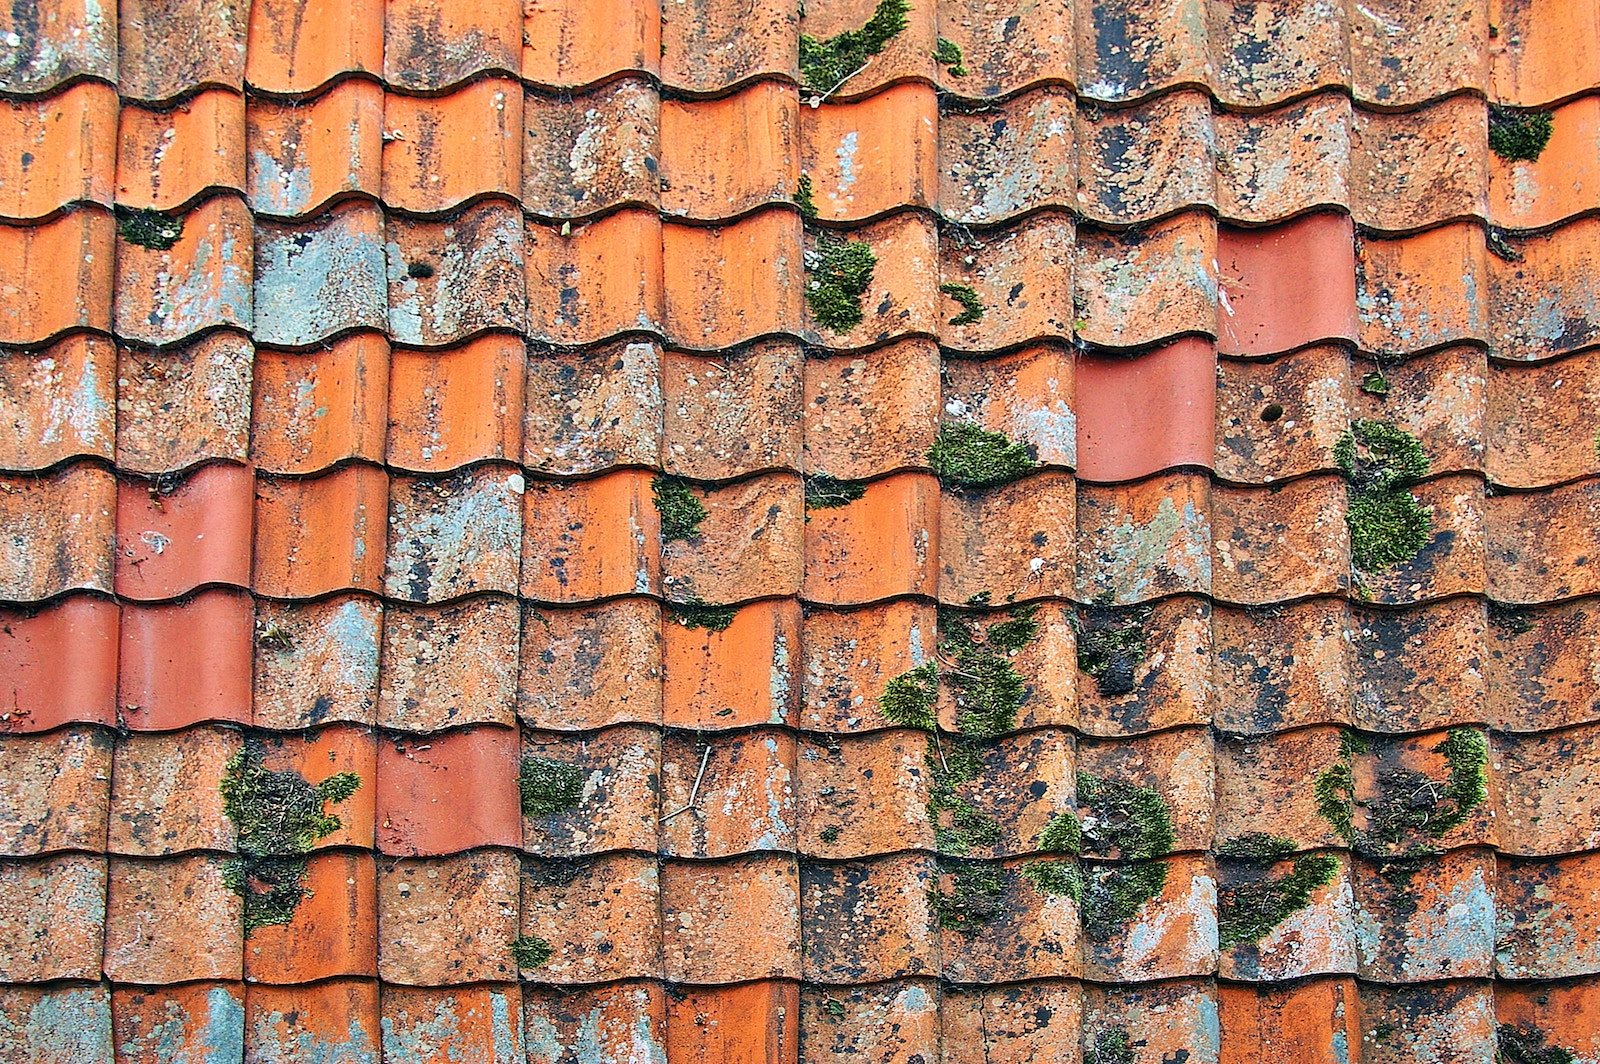 Roof maintenance checklist: are there any large areas of moss or lichen?